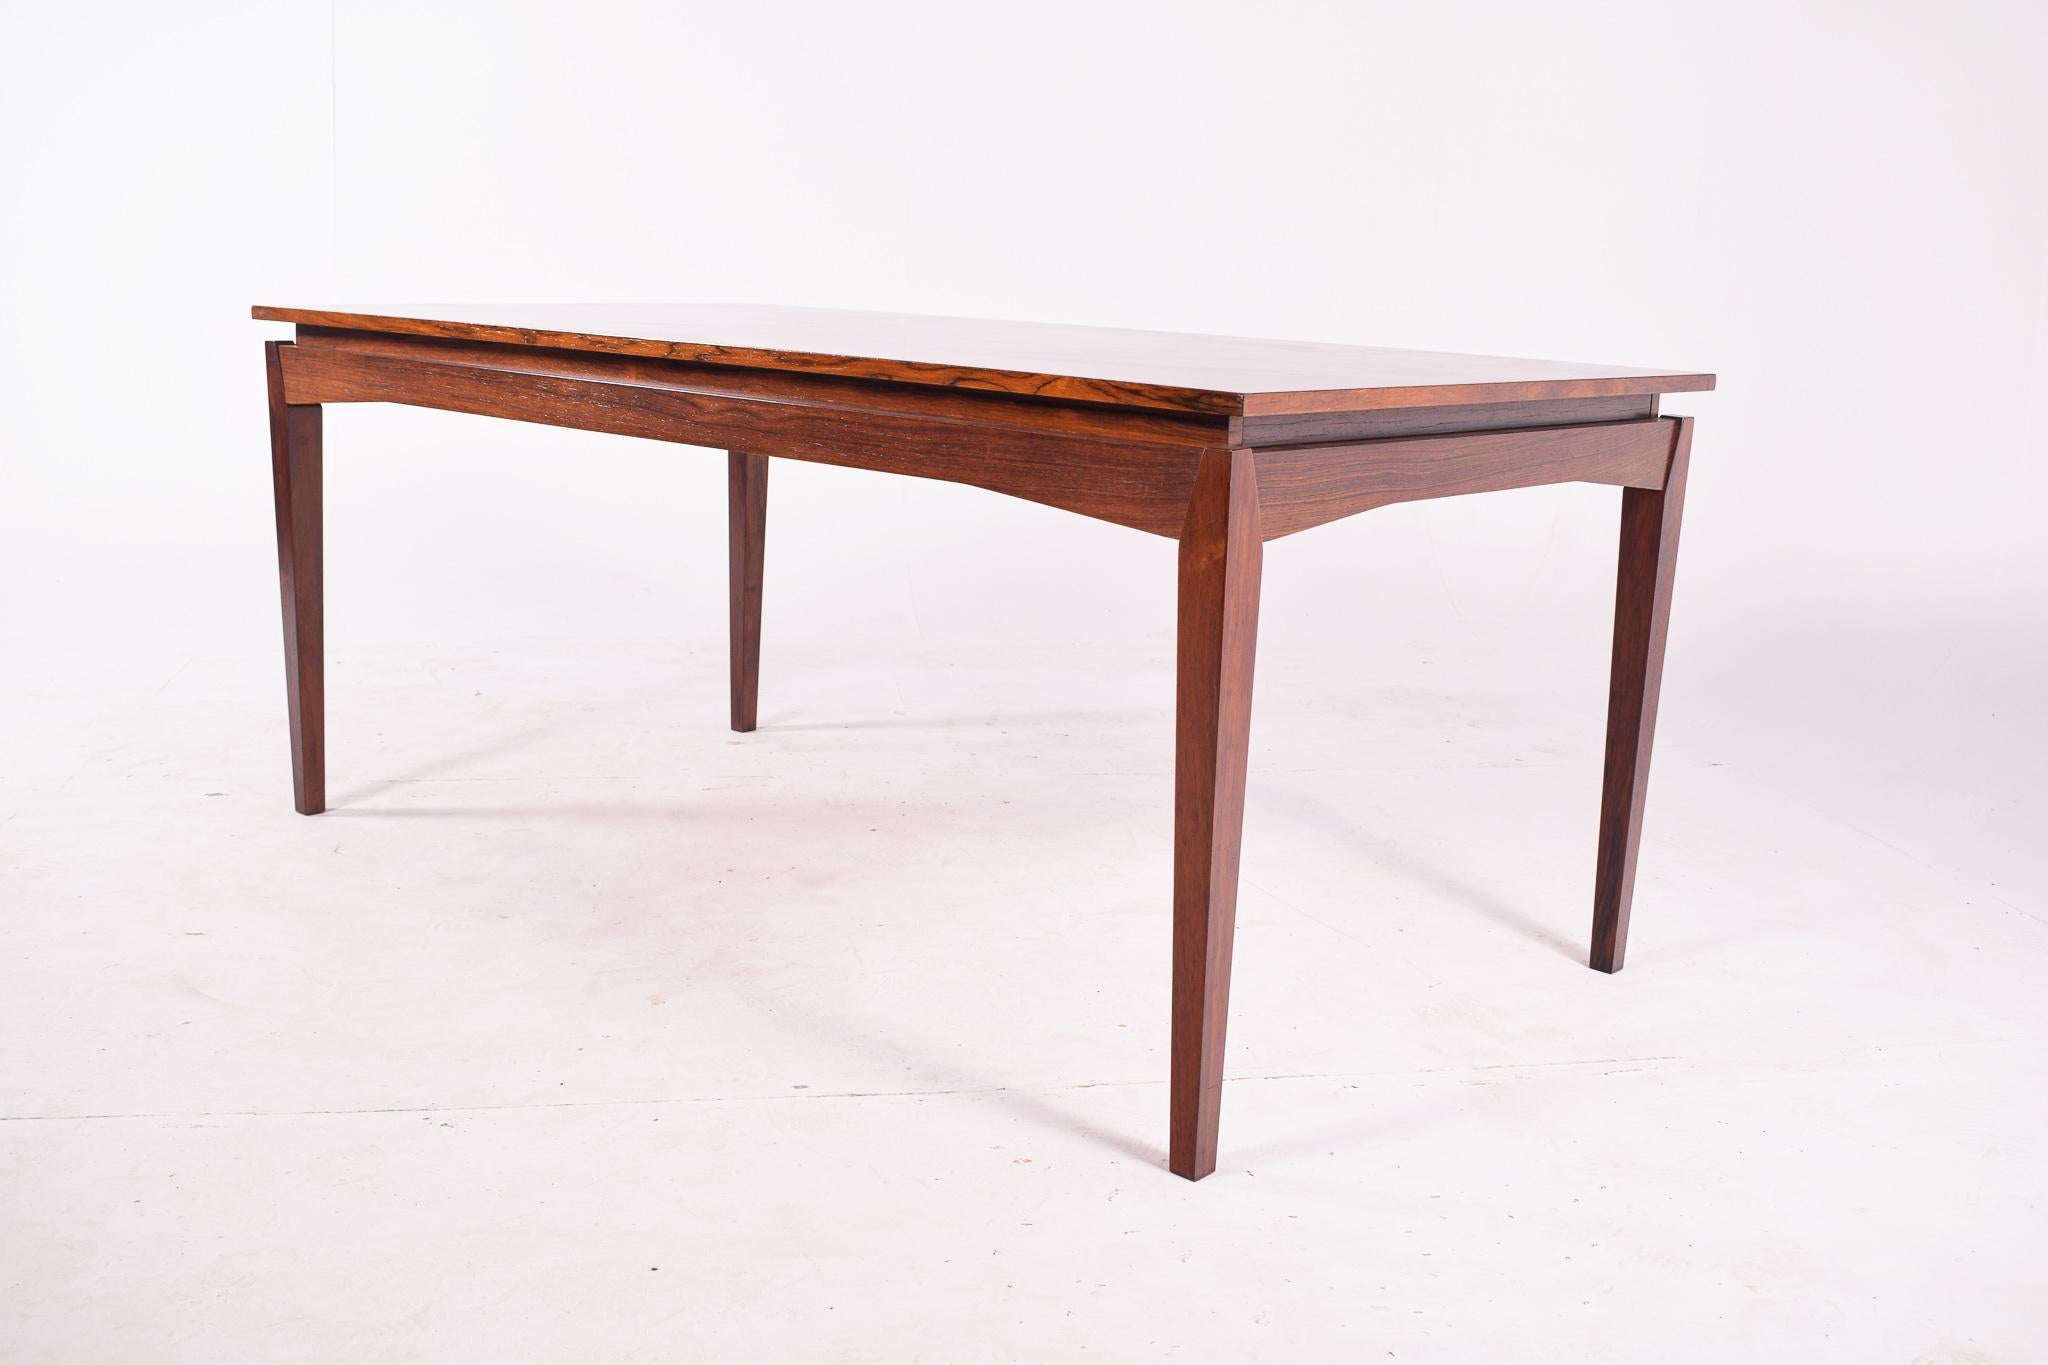 Danish rosewood extendable dining table designed by H.W. Klein for Bramin. Fantastic design. This rectangular table extends on the end with two extension leaves with 55 cm each. Extensions stored inside table. Very pratical table has you have the